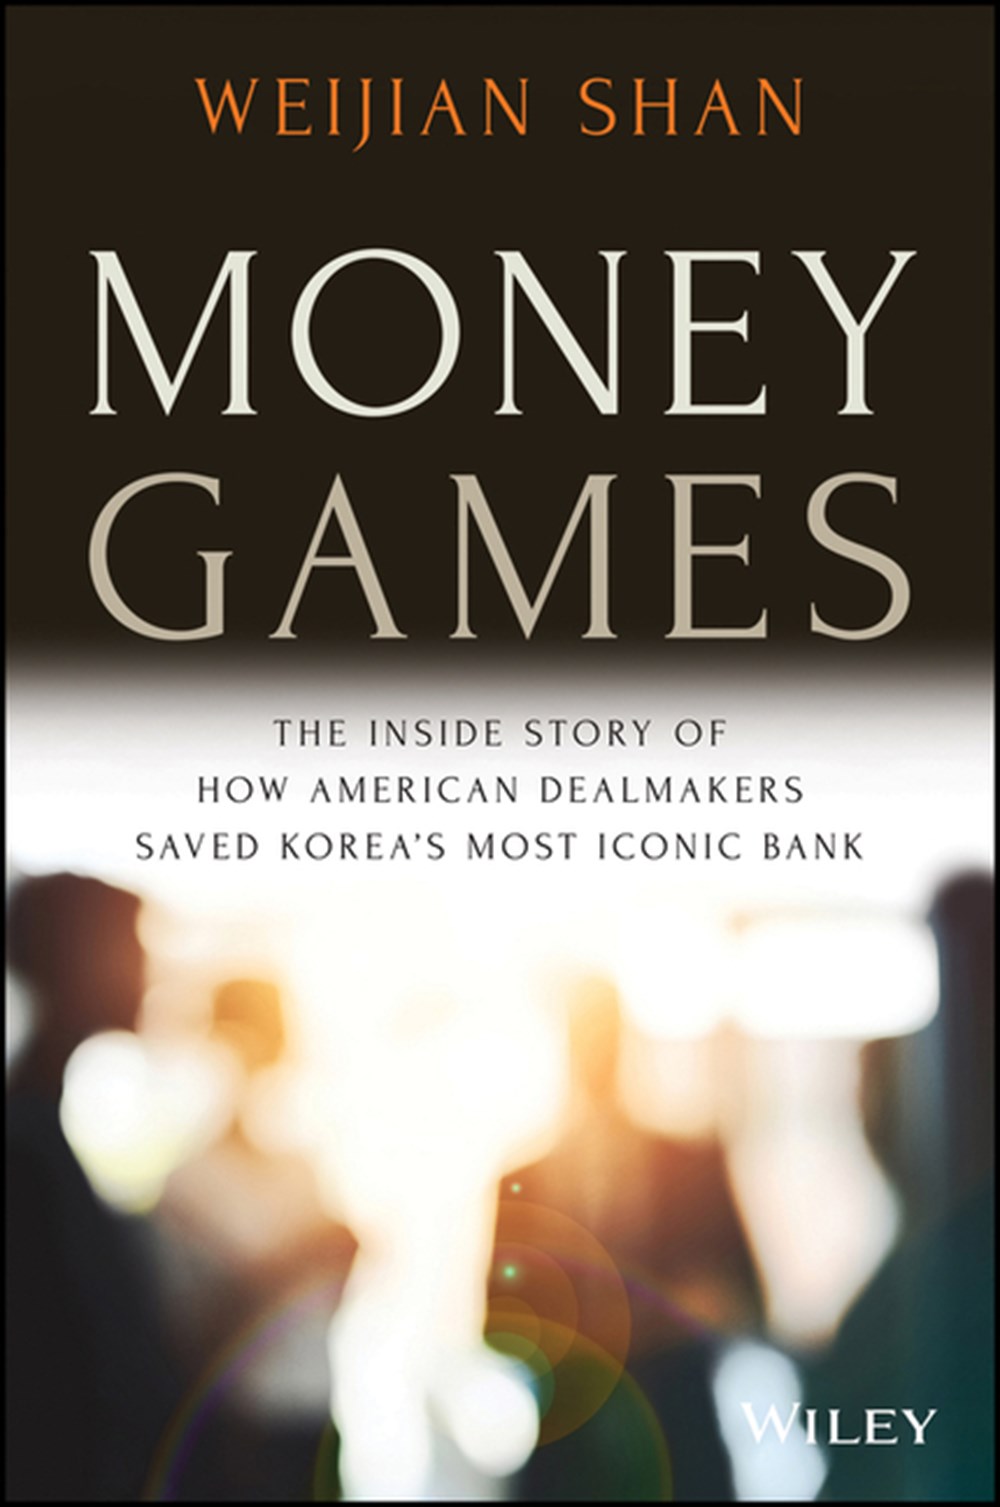 Money Games The Inside Story of How American Dealmakers Saved Korea's Most Iconic Bank